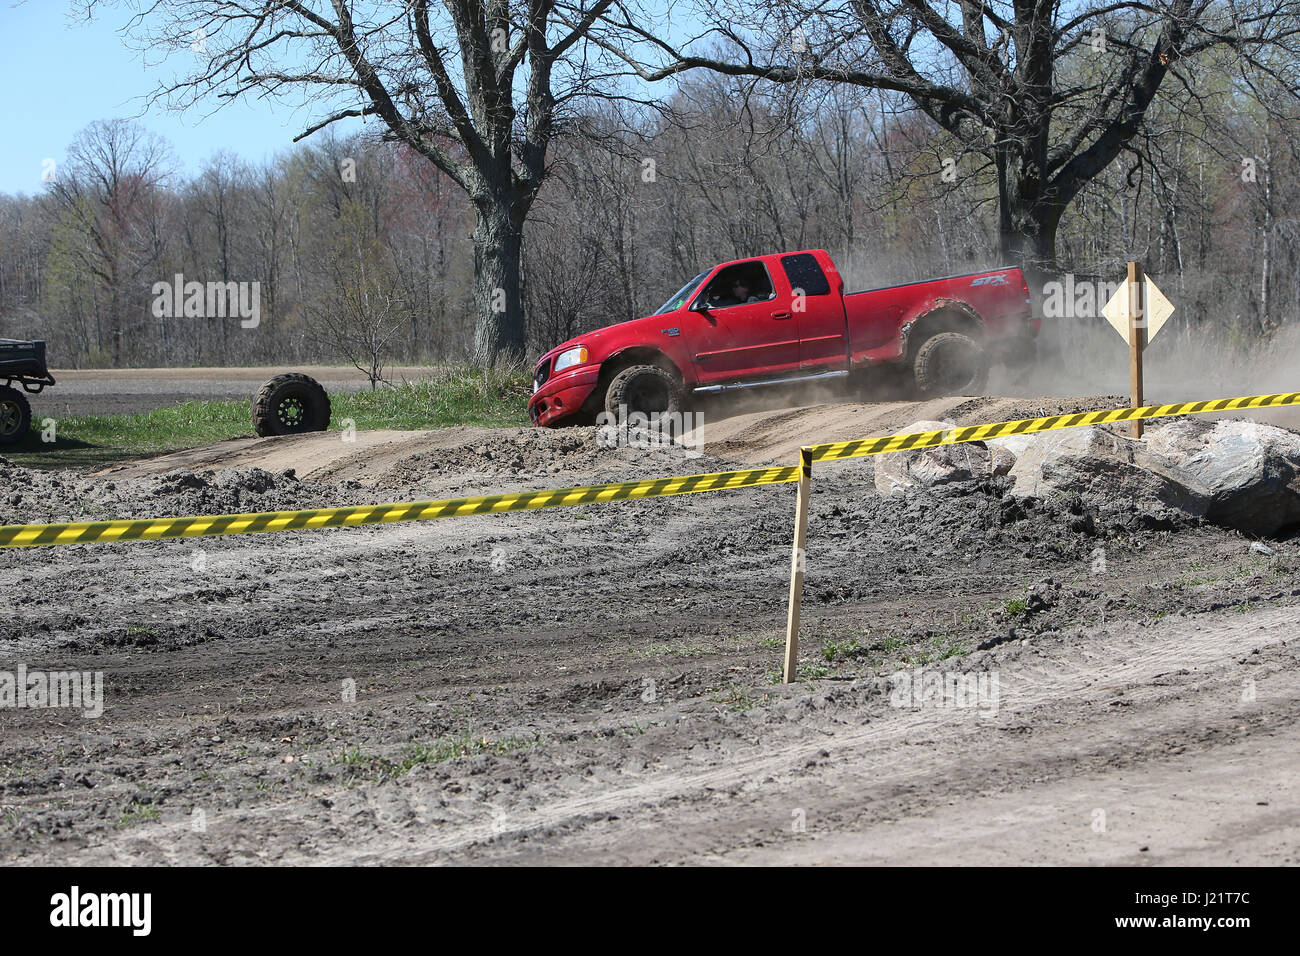 Courtland, Canada. 23rd Apr, 2017. Mud fans from all over headed to the Gopher Dunes in Norfolk Ontario today. The track consisted of 5 mud pits, 2 rock pits and a track through the forest. The high powered personal trucks made attempts to clear the mudded area. If any the trucks got stuck, there was a tractor next to the pit ready to pull them out of the mud. At the end of the day everyone went home happy even though there was blown motors, broken axels and tires that came off the trucks. Credit: Luke Durda/Alamy Live News Stock Photo